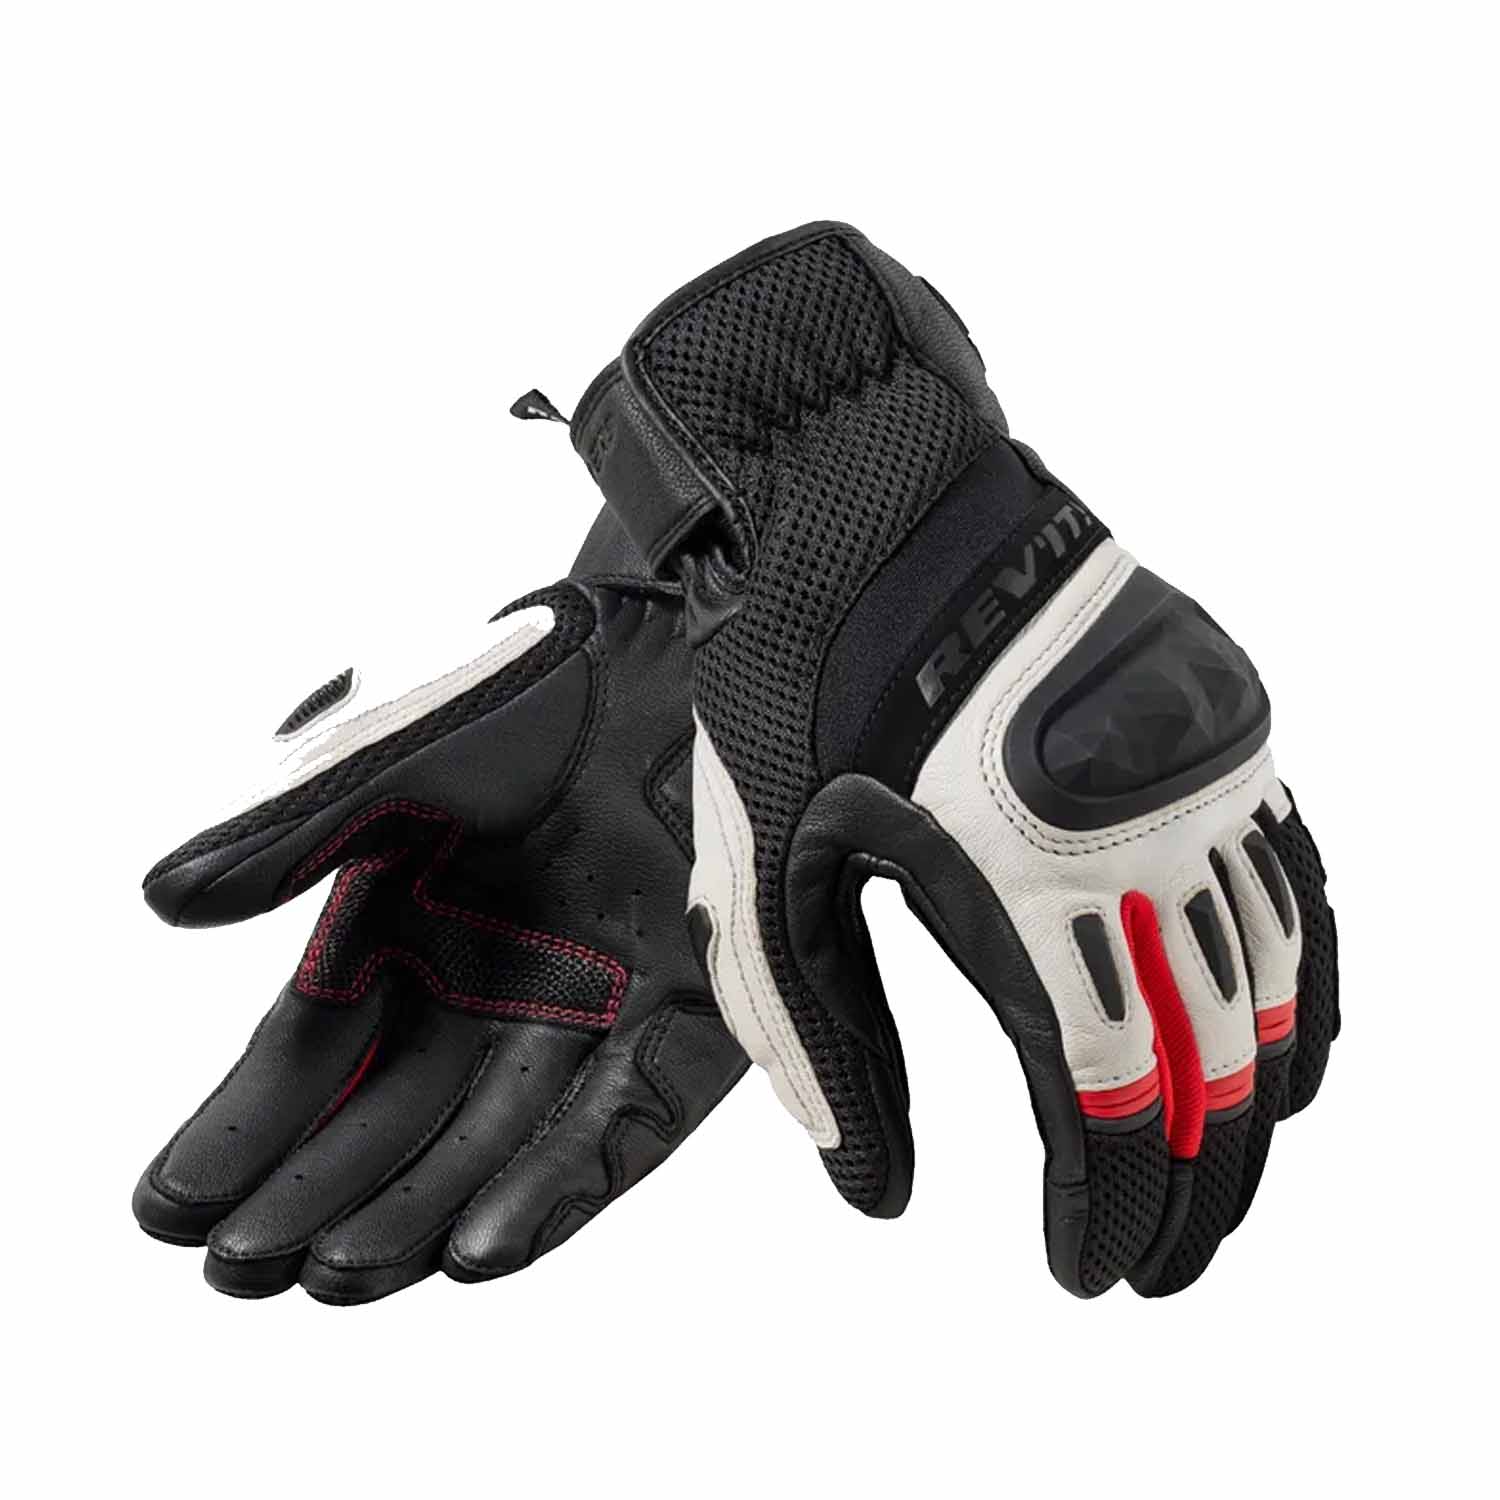 Image of REV'IT! Dirt 4 Gloves Black Red Taille L